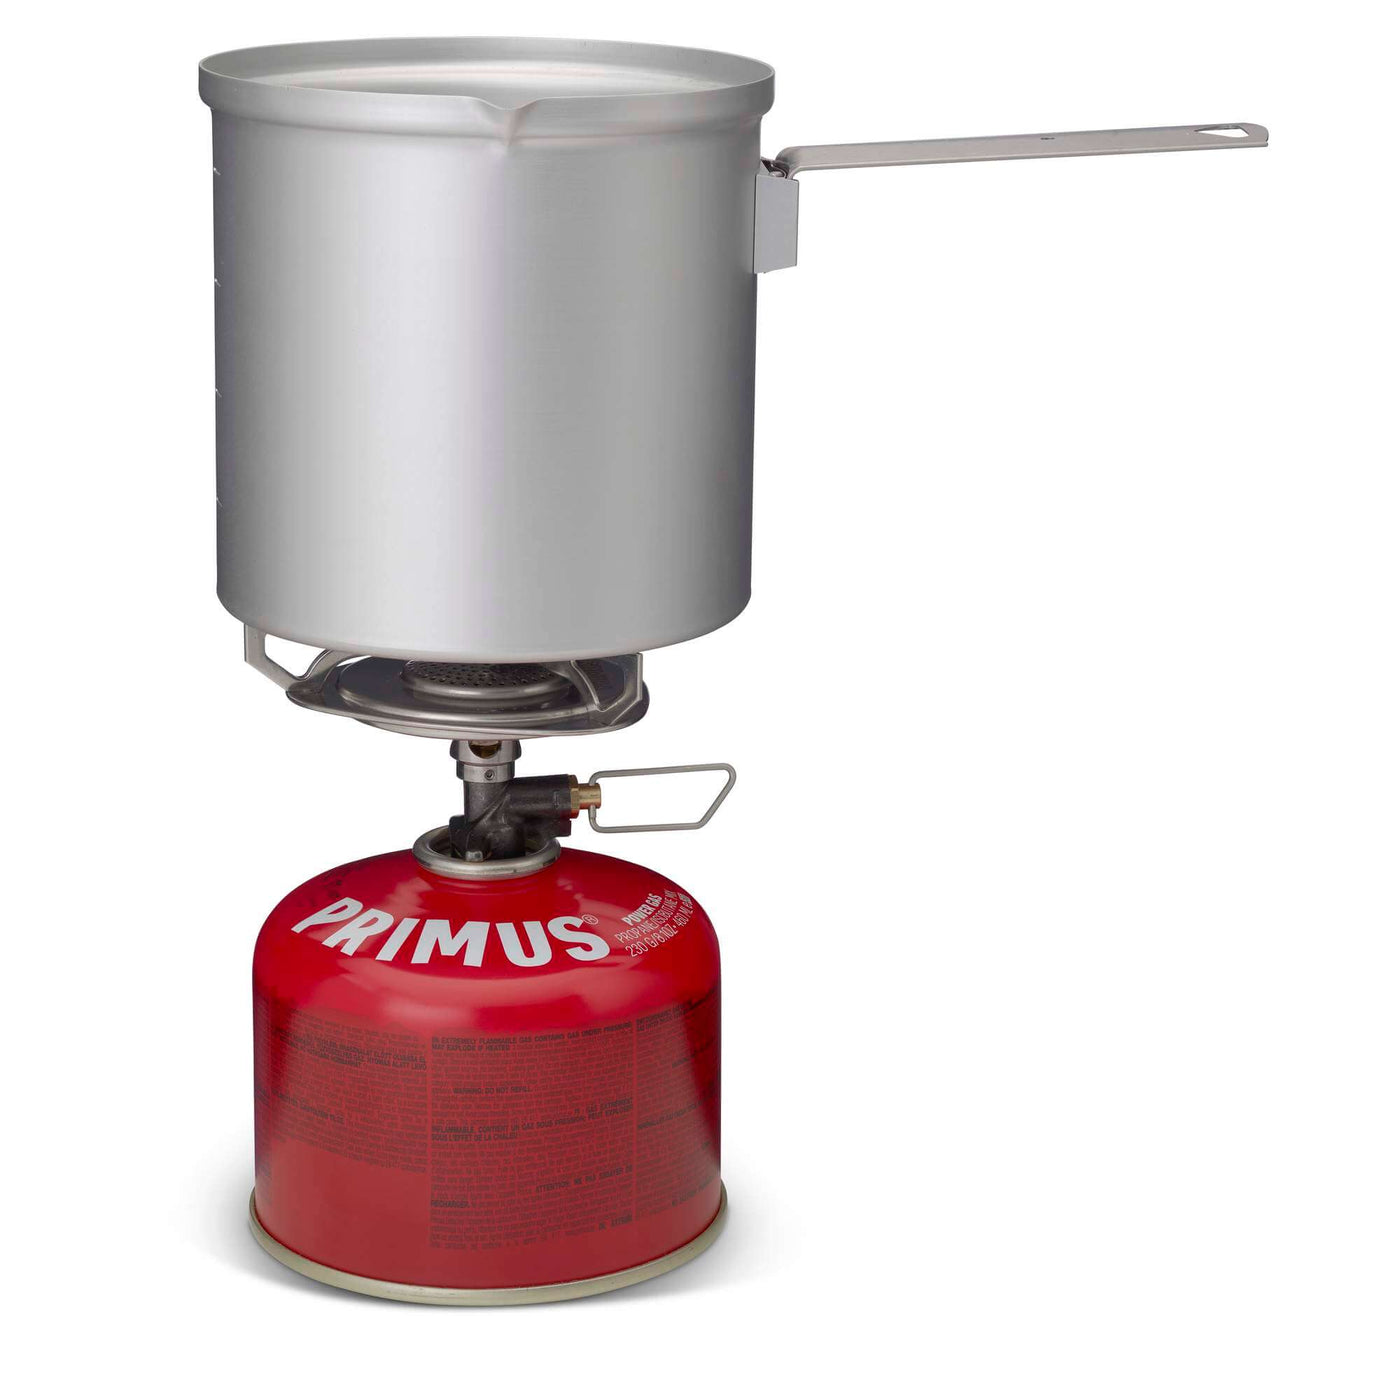 Primus Essential Trail Stove  | Camping Cookers and Stoves NZ | Primus NZ